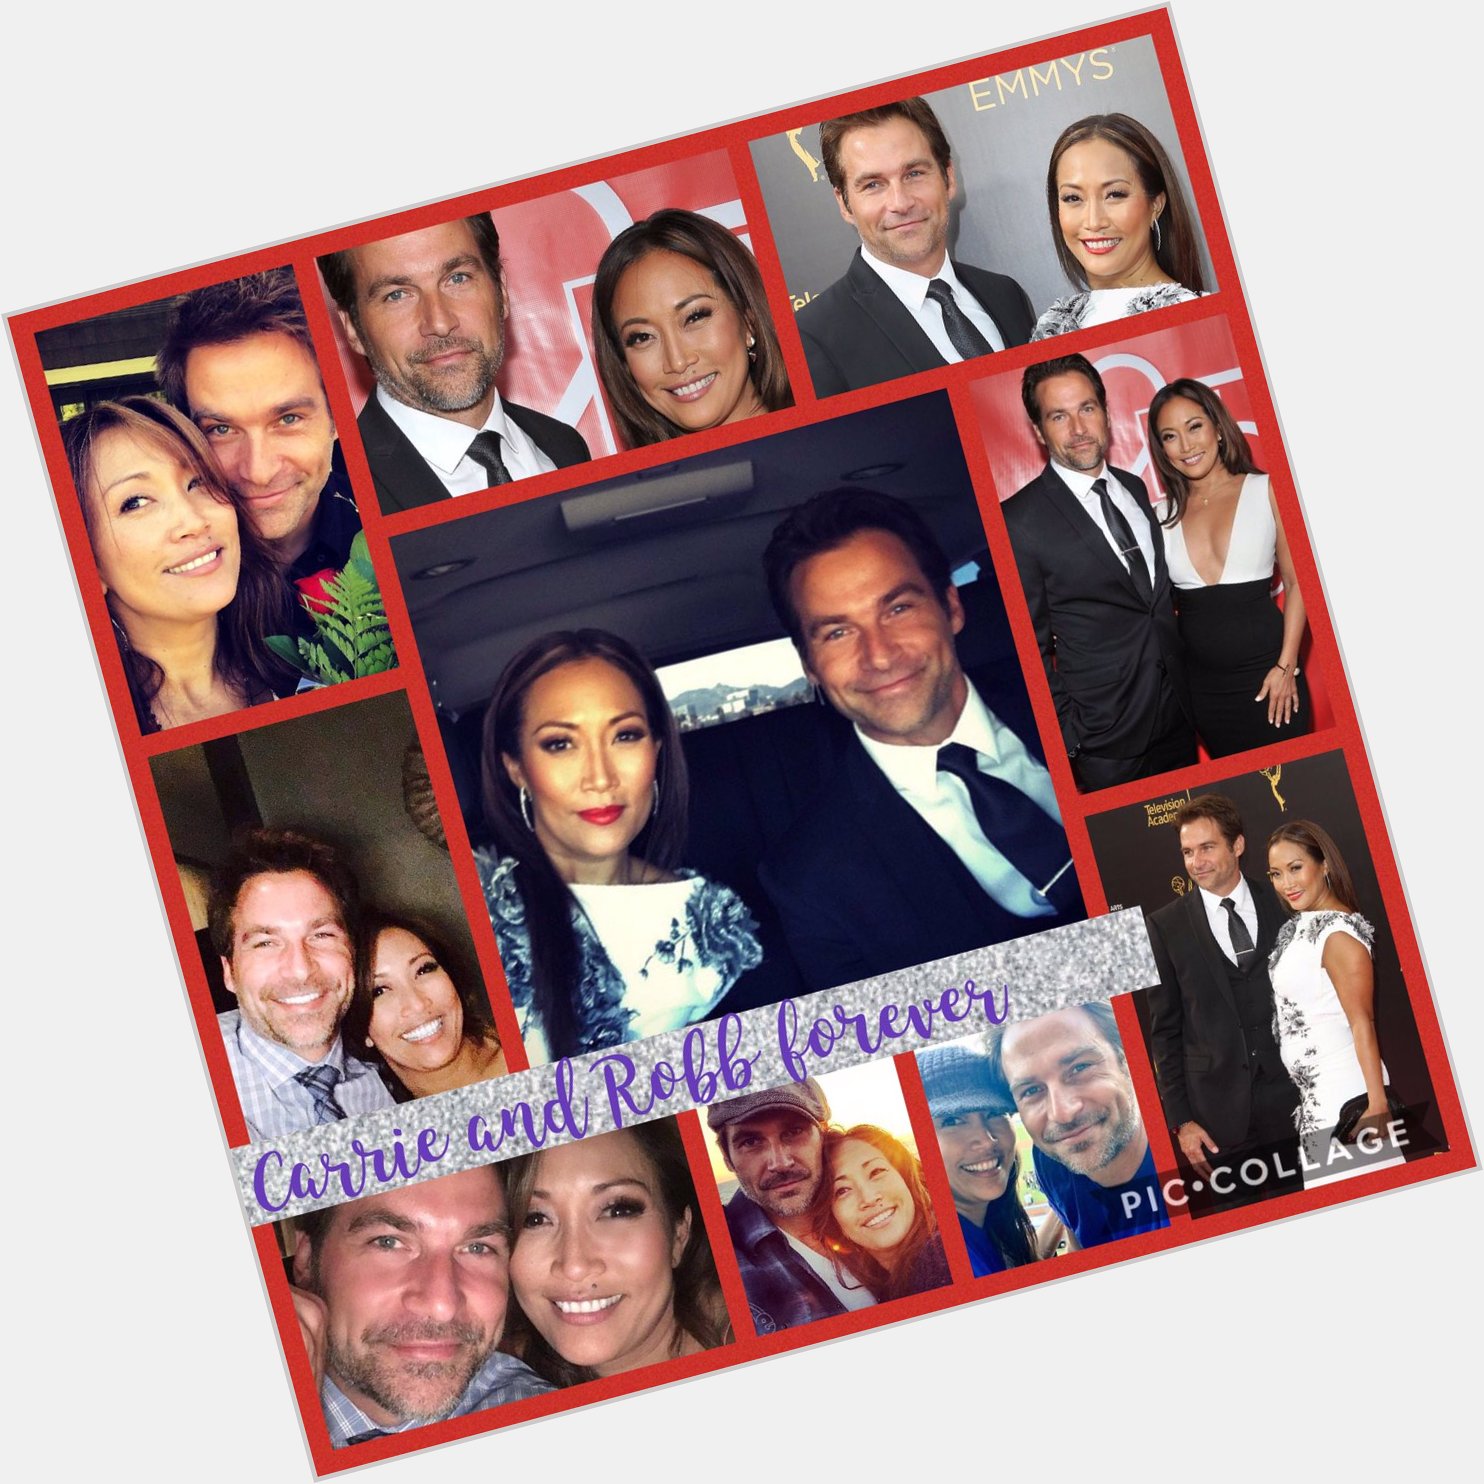      Carrie Ann inaba and Robb Derringer make an adorable couple. Happy birthday Robb.      